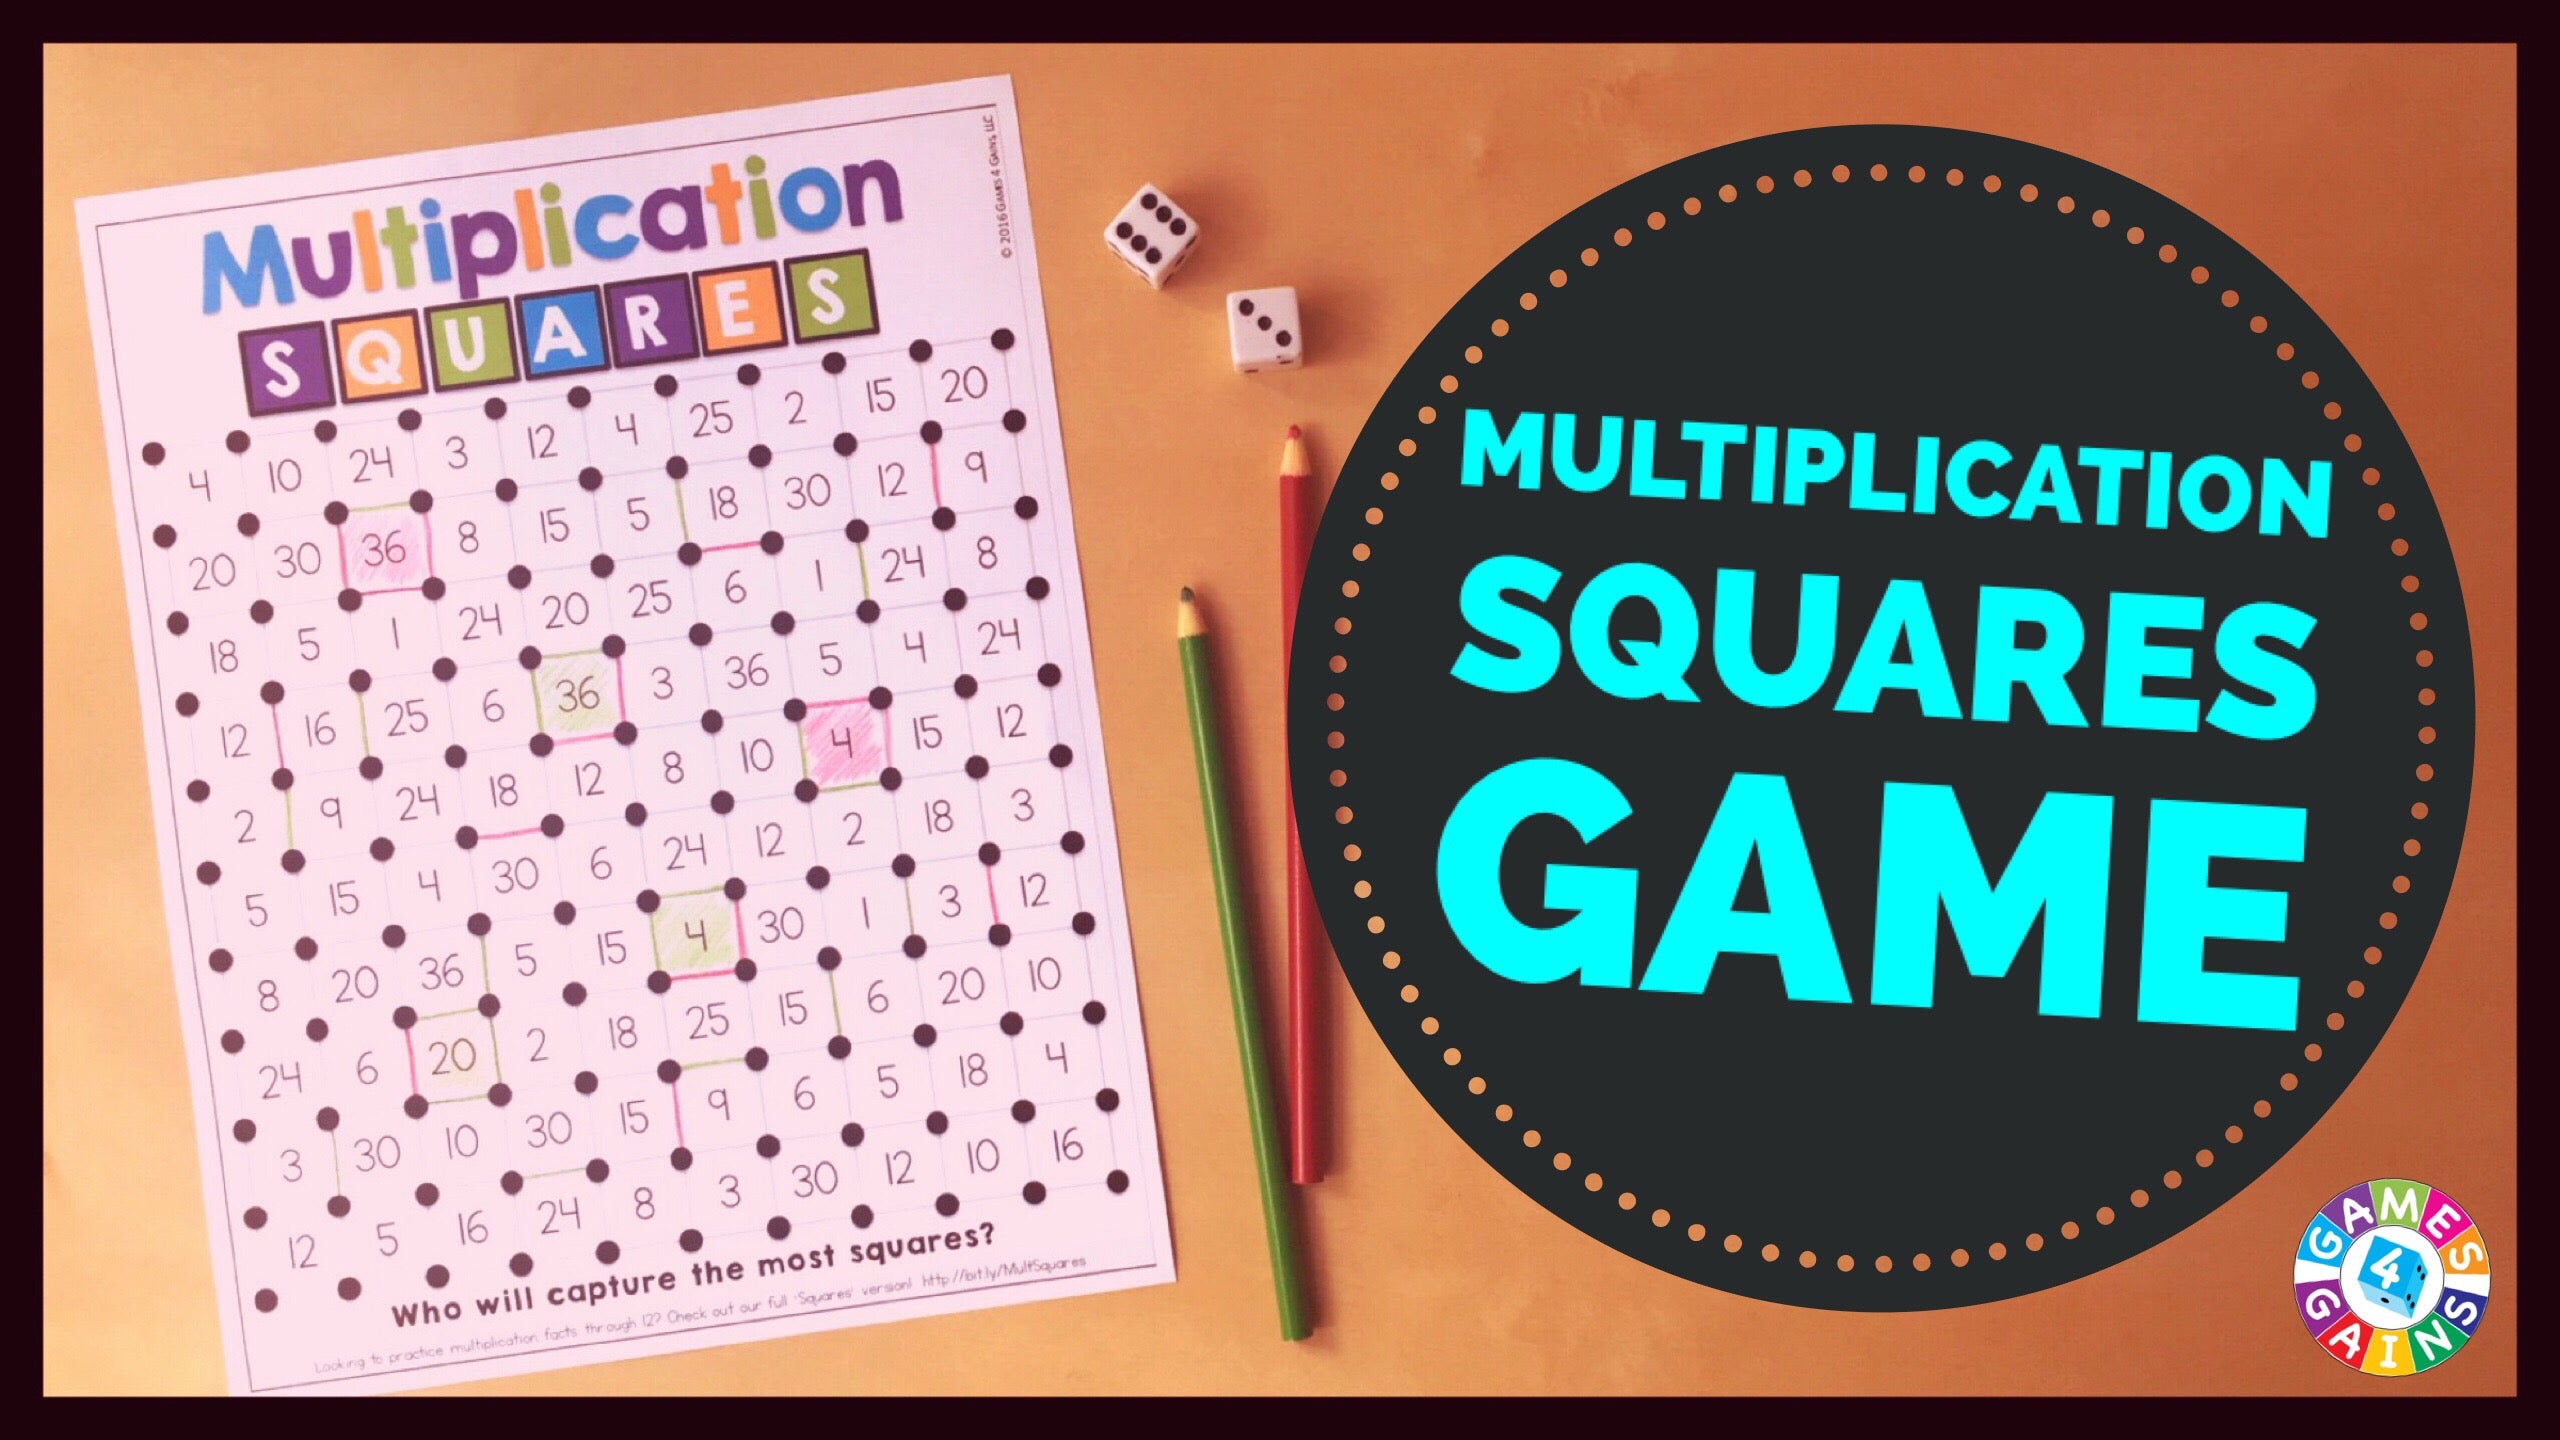 We've "Mathified" The Squares Game! – Games 4 Gains